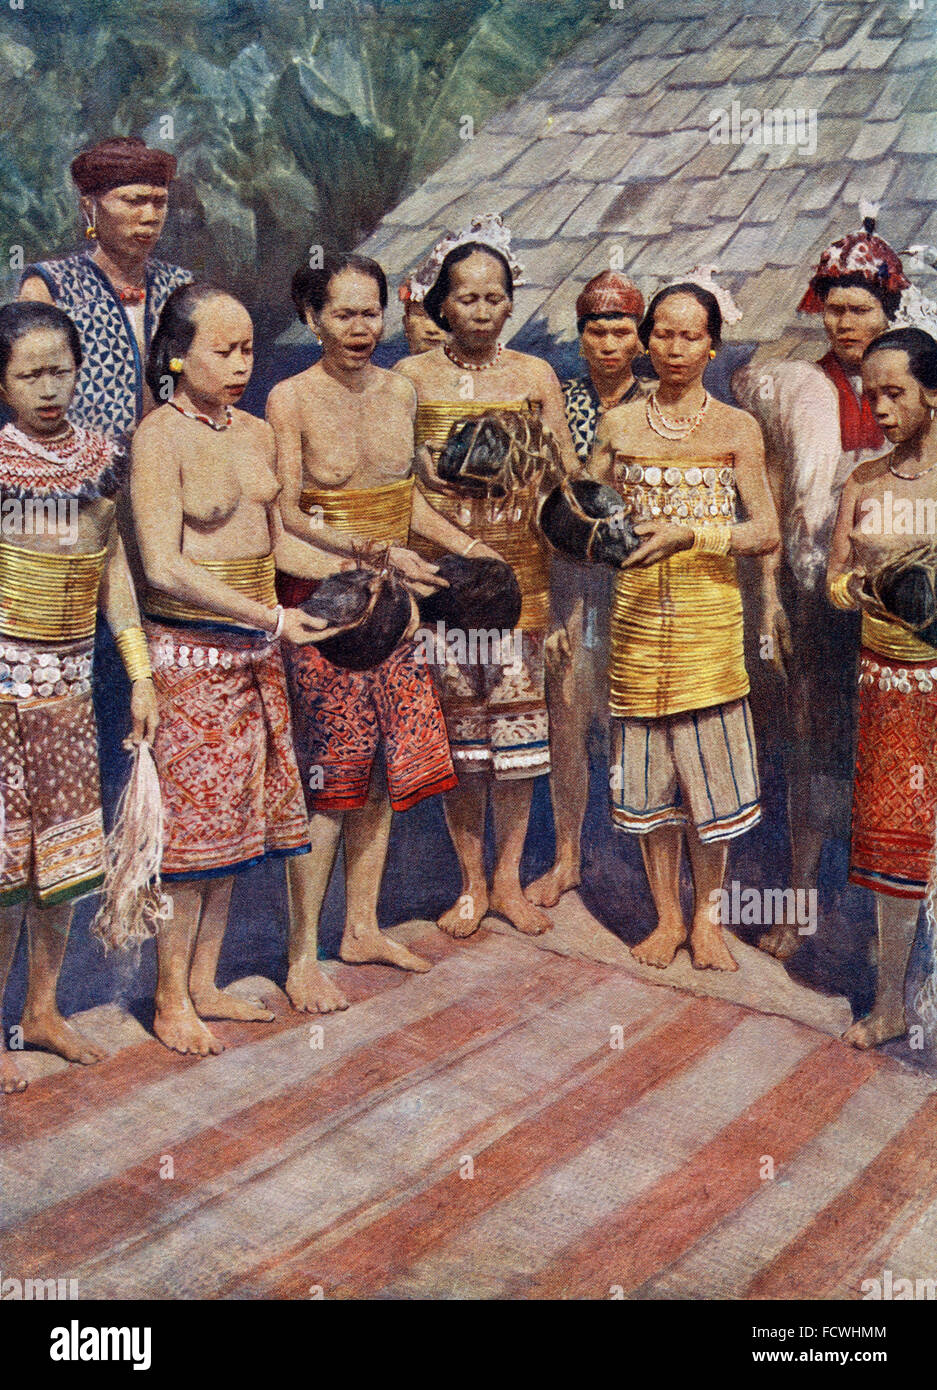 Dayak, Dyak or Dayuh women of Borneo, south east Asia, dancing with human heads.  A few days after the return of a successful head-hunting expedition, the heads, which had been hacked off the dead bodies, were brought into the house. Then followed a time of rejoicing in the course of which the heads were taken by the women who, having performed fantastic dances, hung them beside the old ones.  The presence of heads in the house was supposed to attract the benevolent spirits who lived around them. Stock Photo